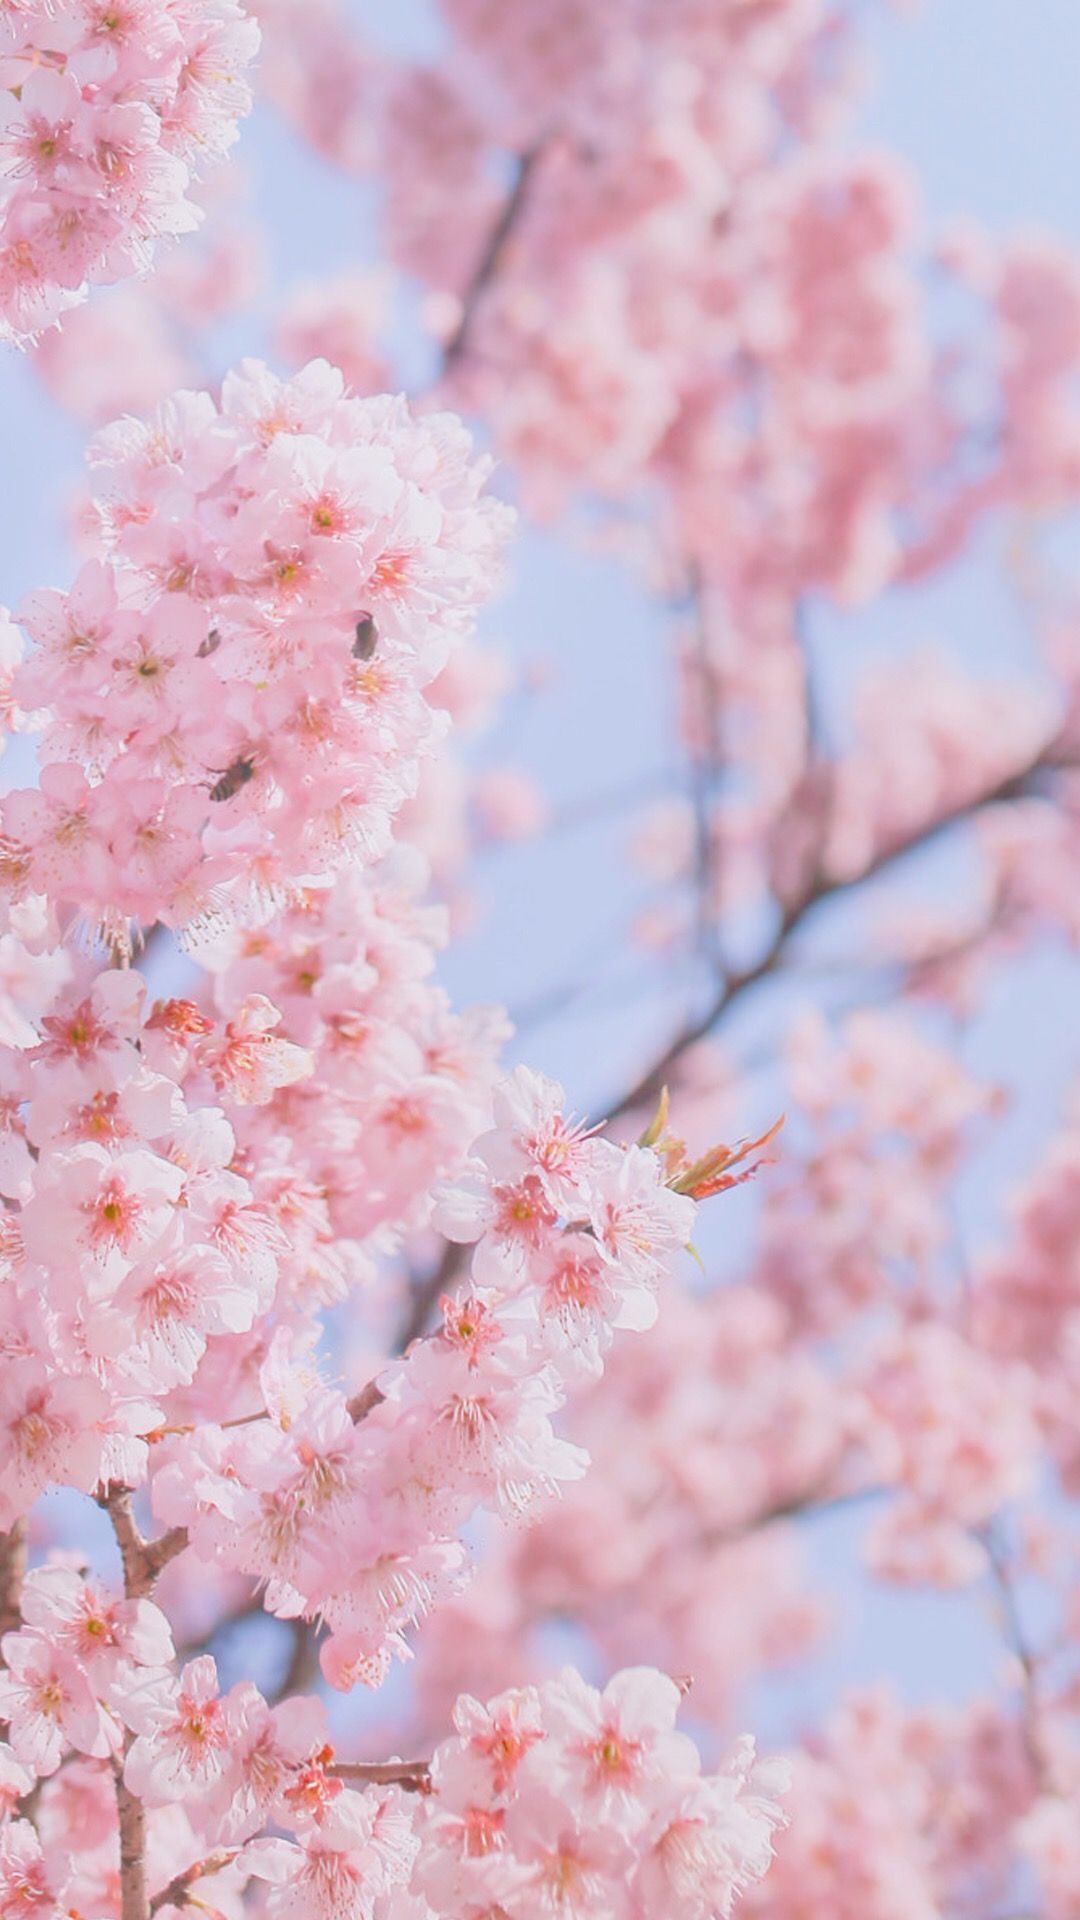 Aesthetic Pink Blossom Wallpapers - Wallpaper Cave